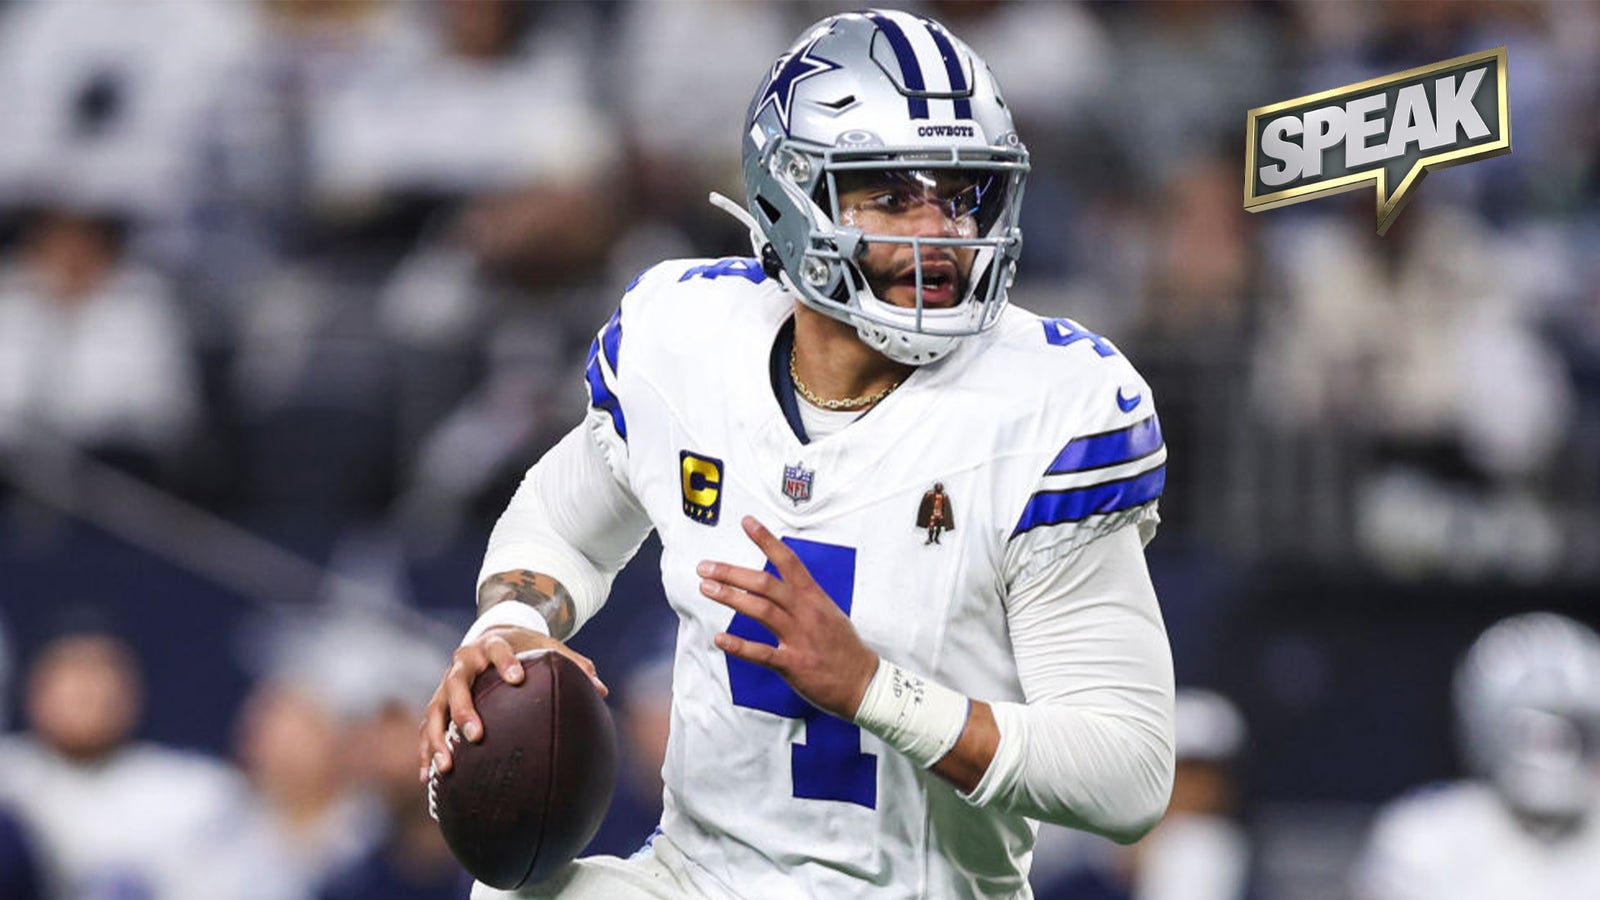 Right move to make Dak Prescott play out his final year?